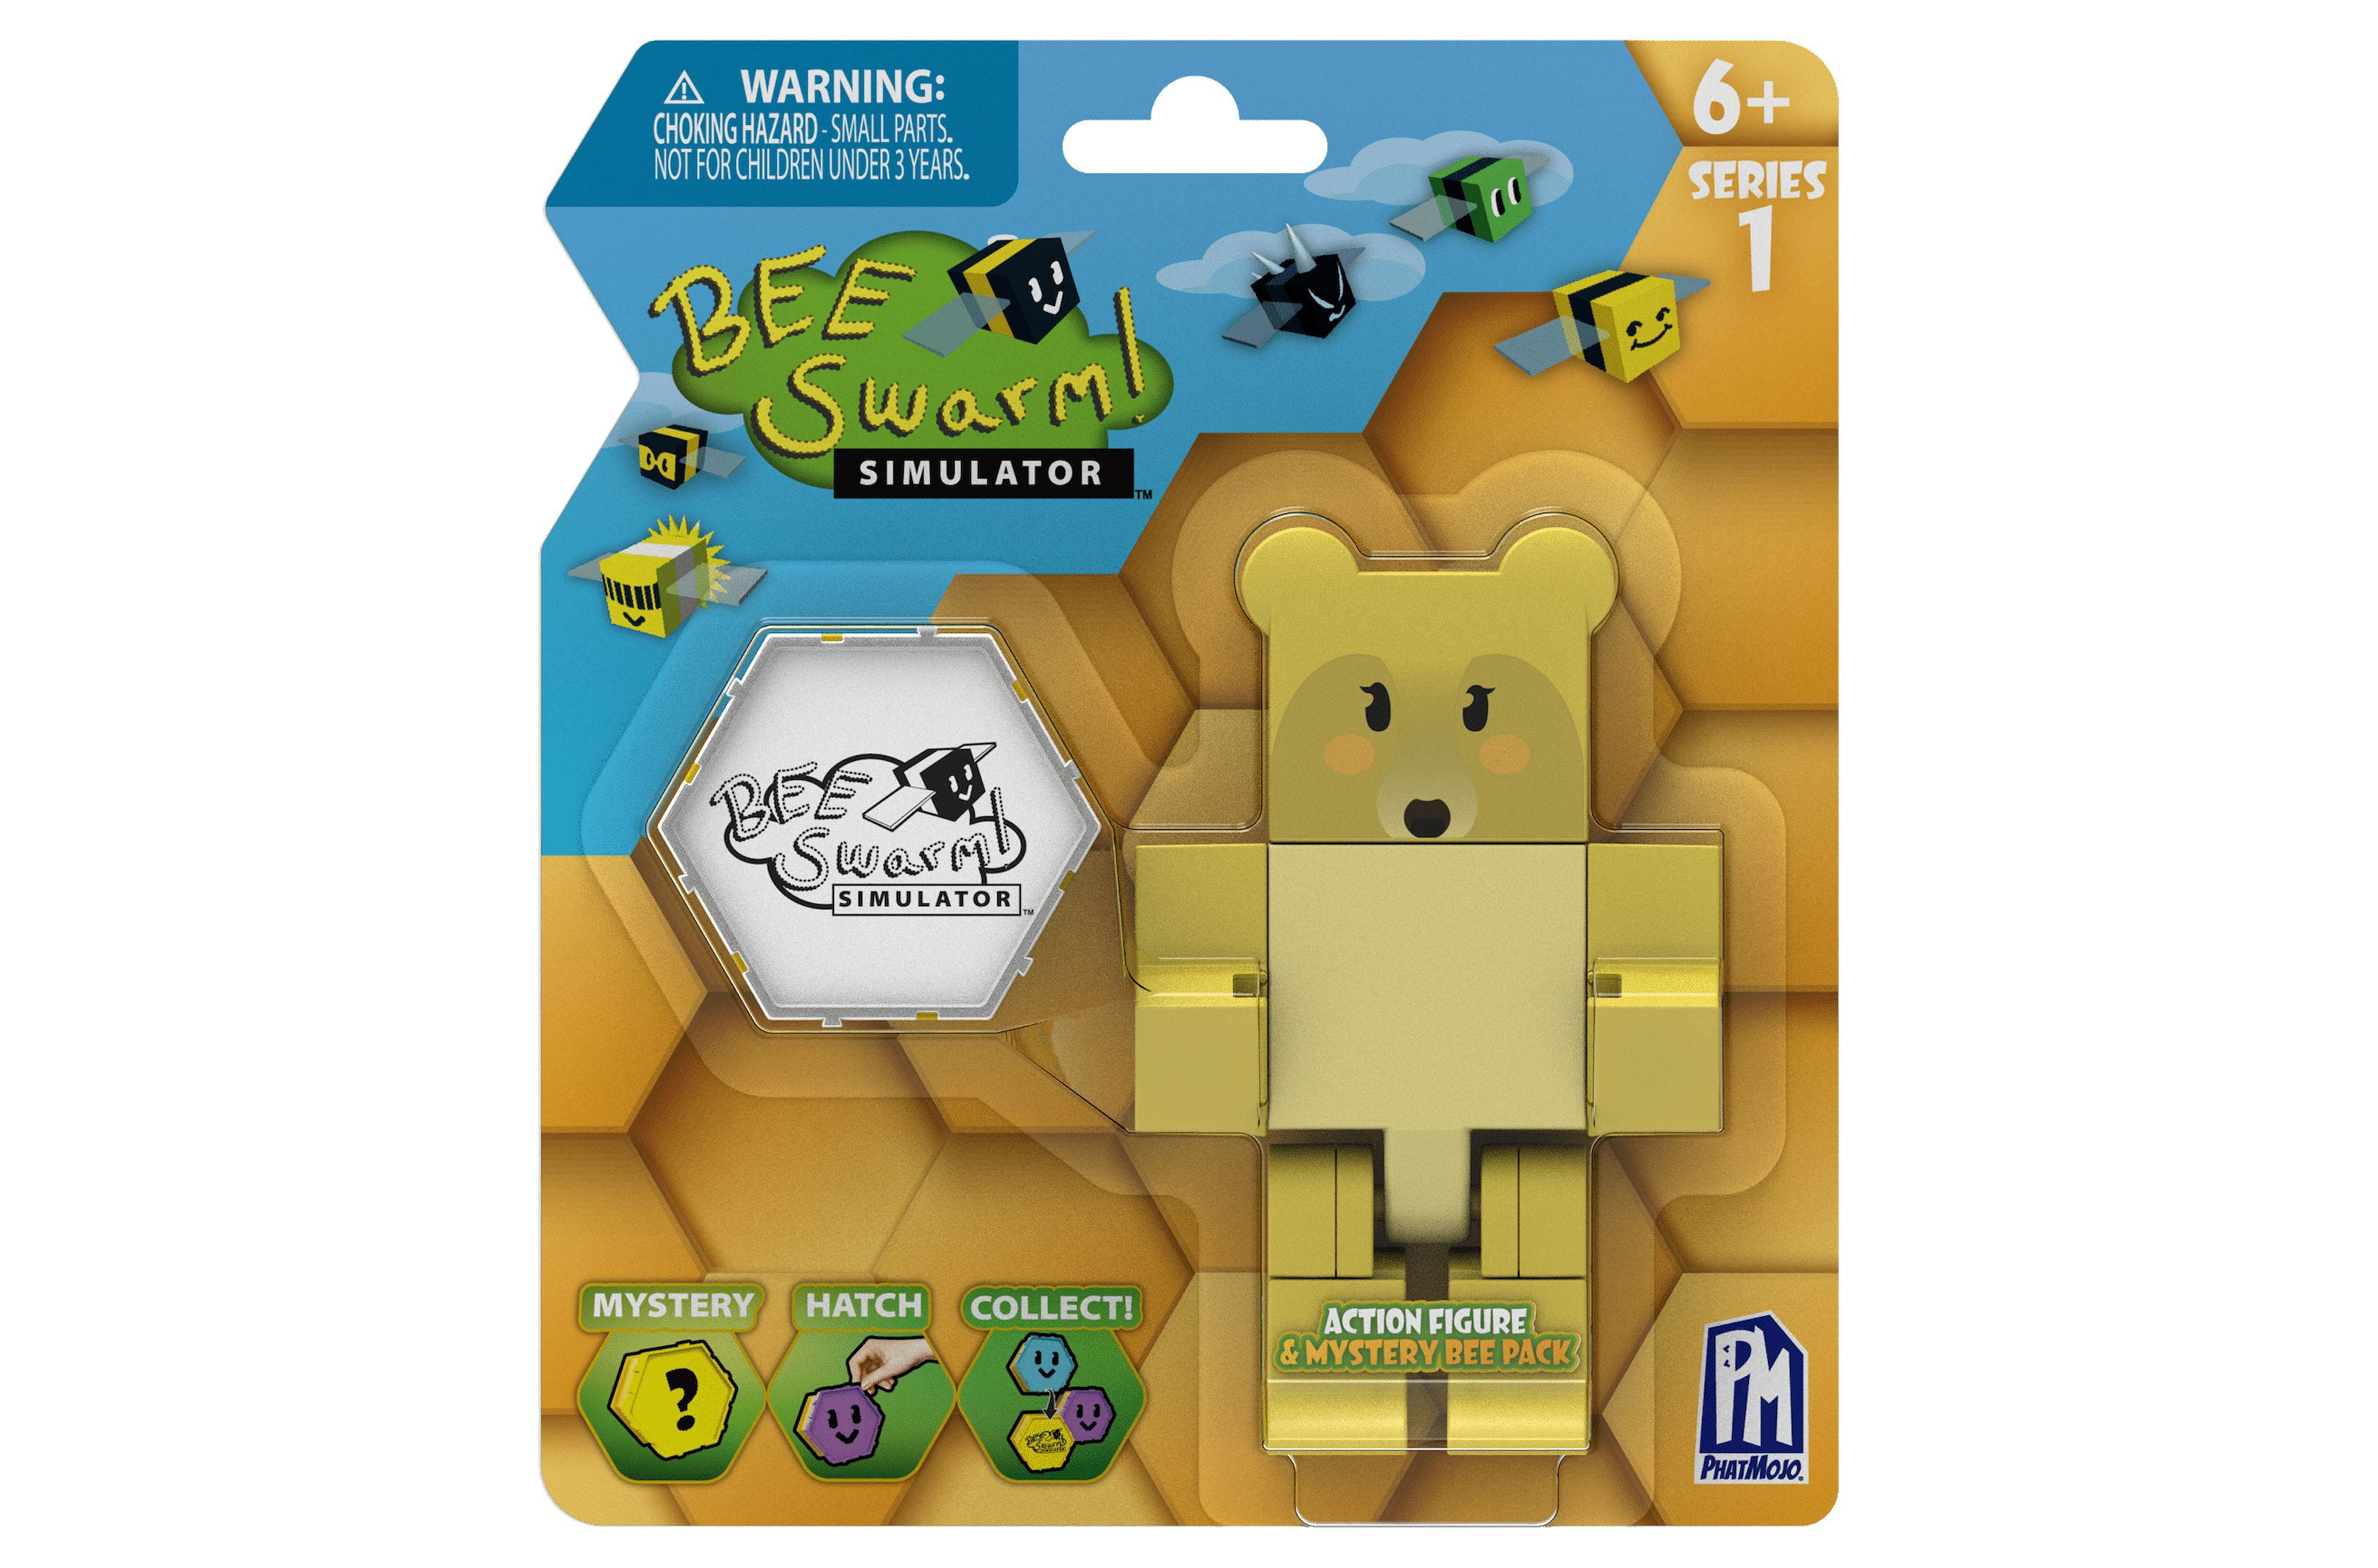 BEE SWARM Simulator ~ from ROBLOX GAME ~ Comes w/ BEAR & MYSTERY BEE~  NEW IN BOX